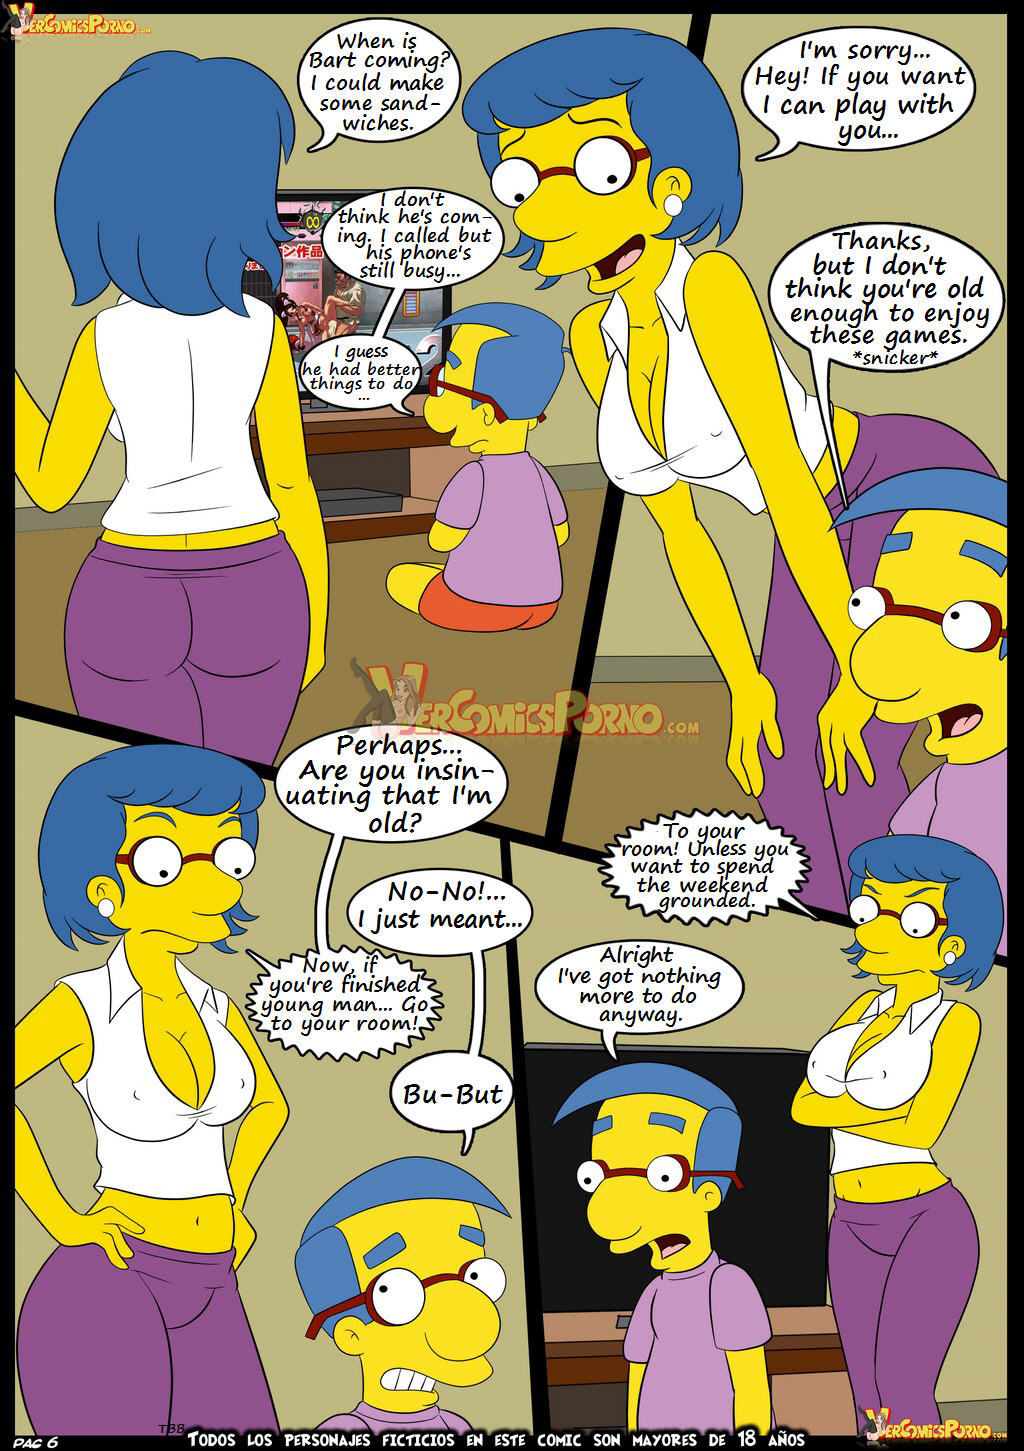 Croc,The Simpsons Learning with Mom-English page 7